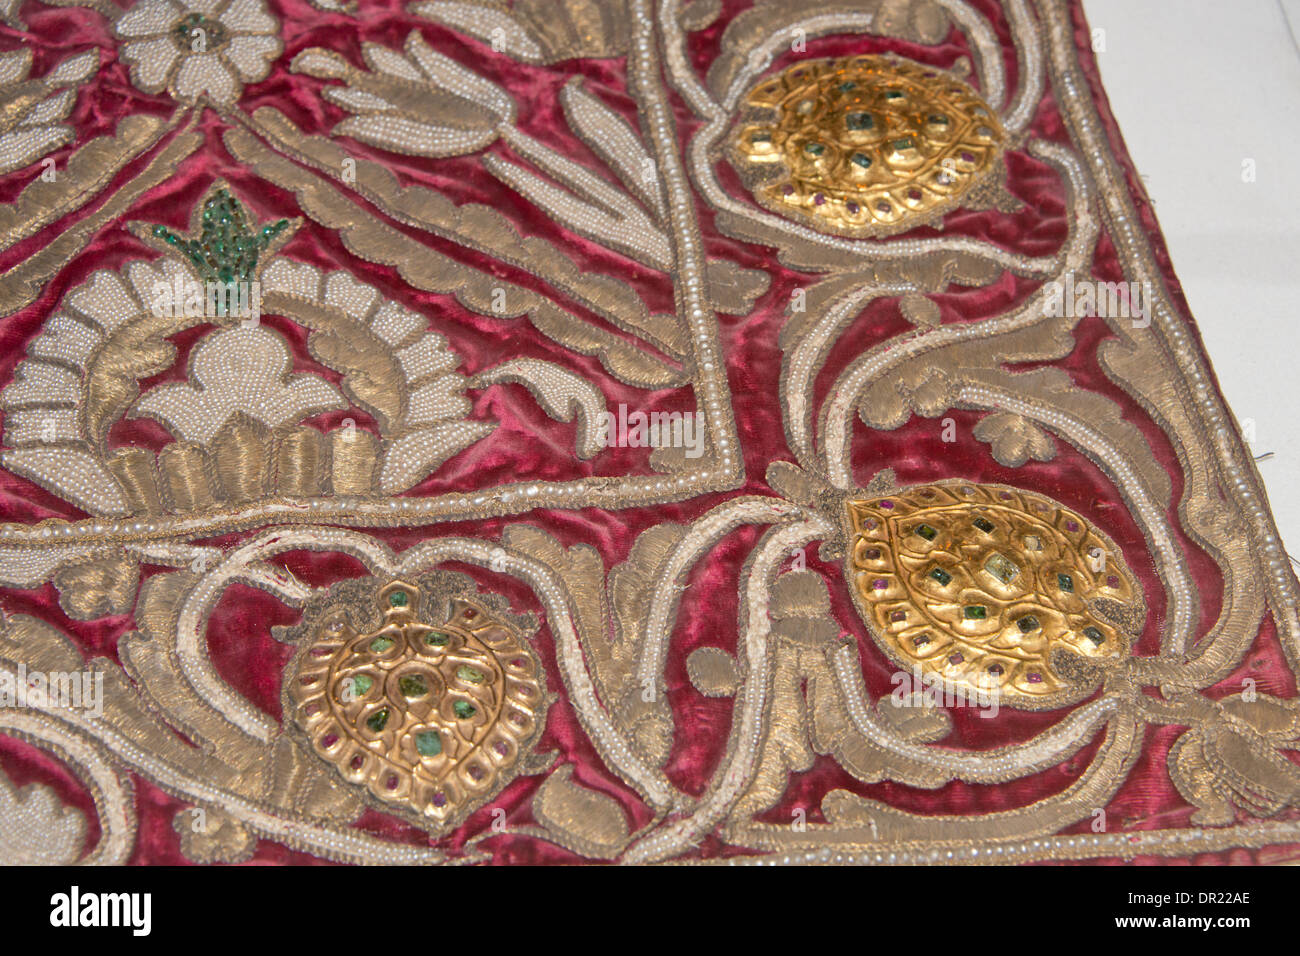 Asia, Turkey, Istanbul, Topkapi. Historic palace hand embroidered silk textile embellished with gold. Stock Photo